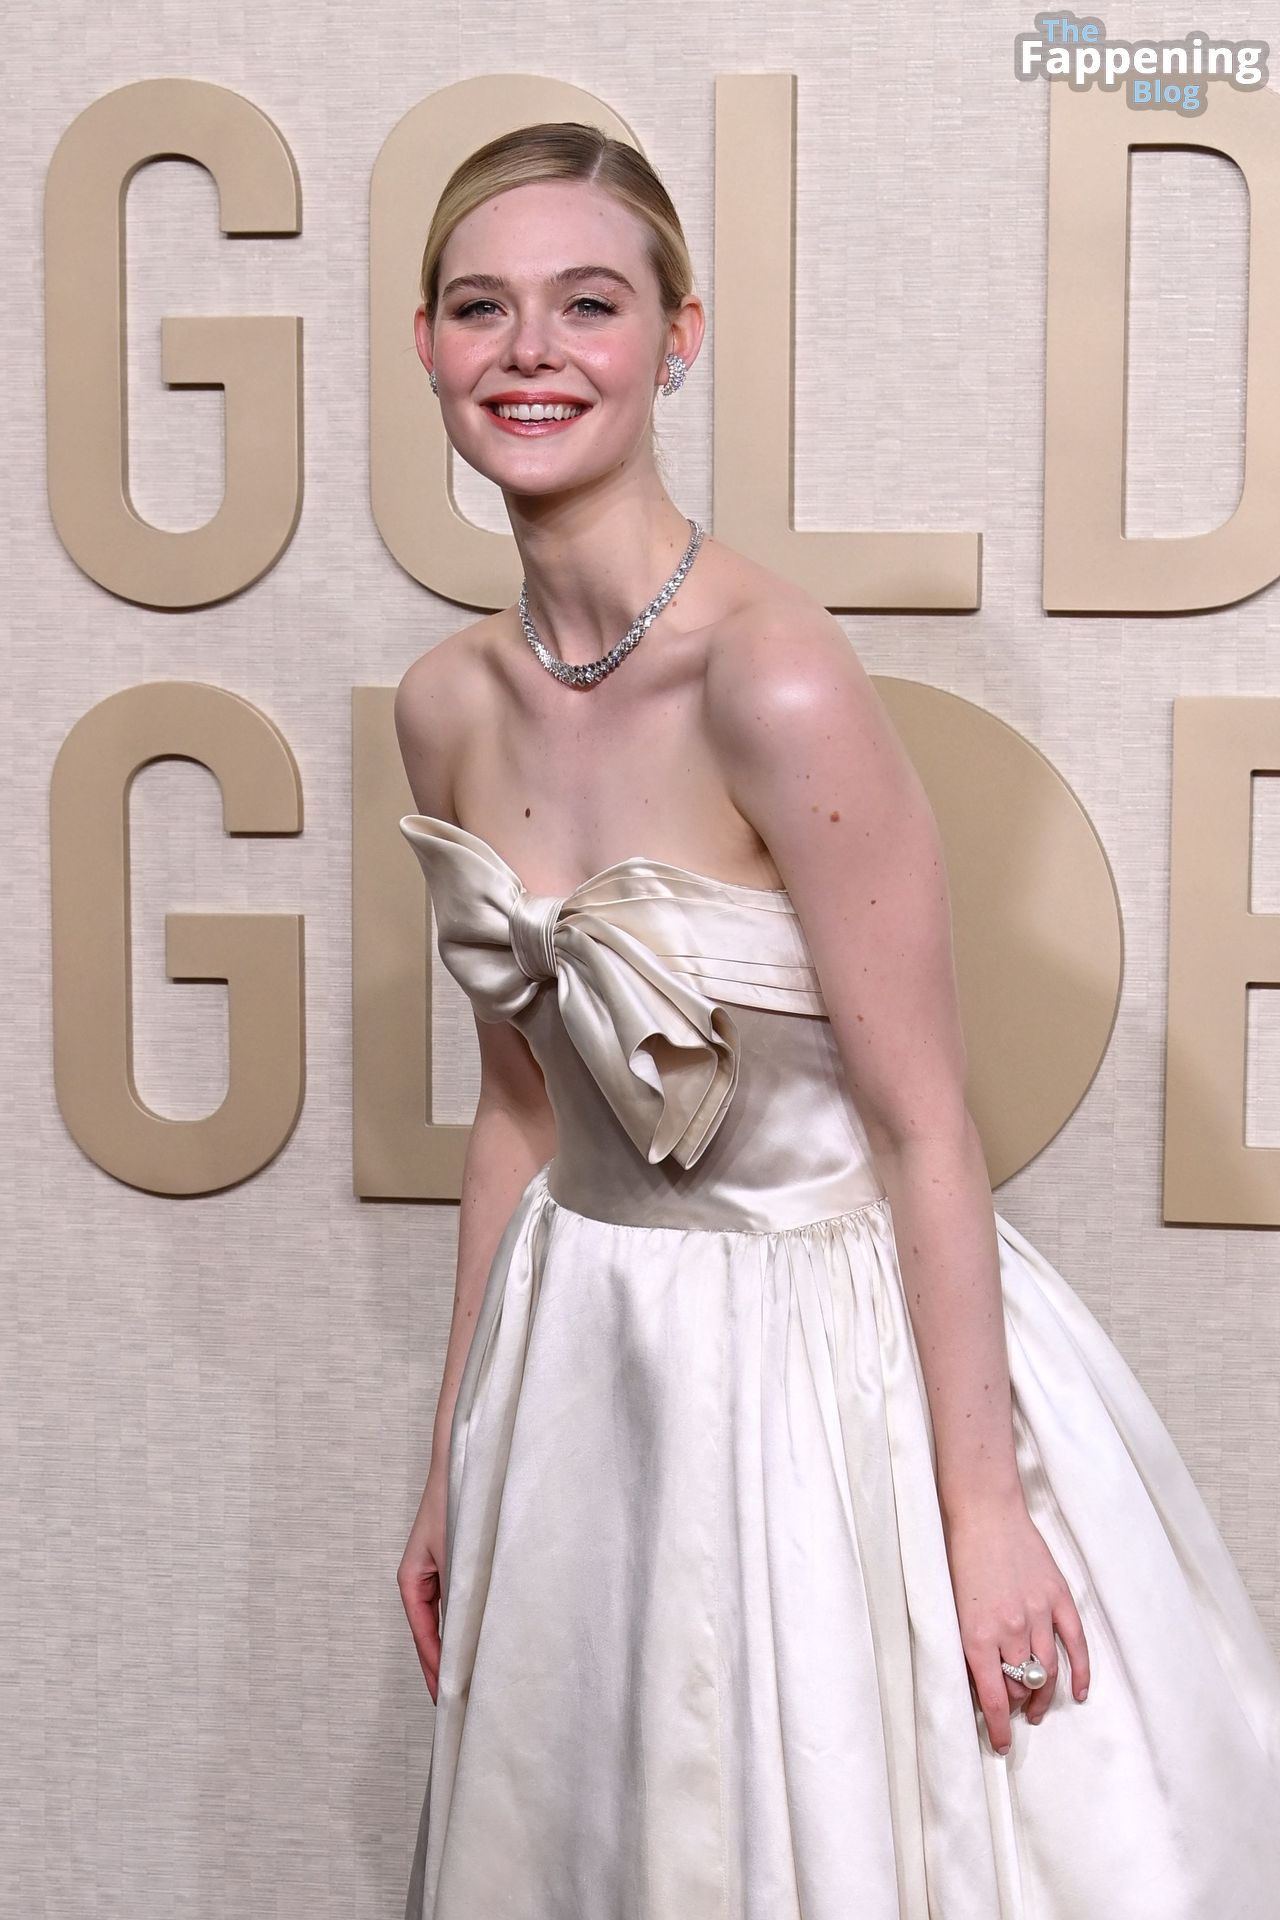 Elle-Fanning-Sexy-55-The-Fappening-Blog.jpg